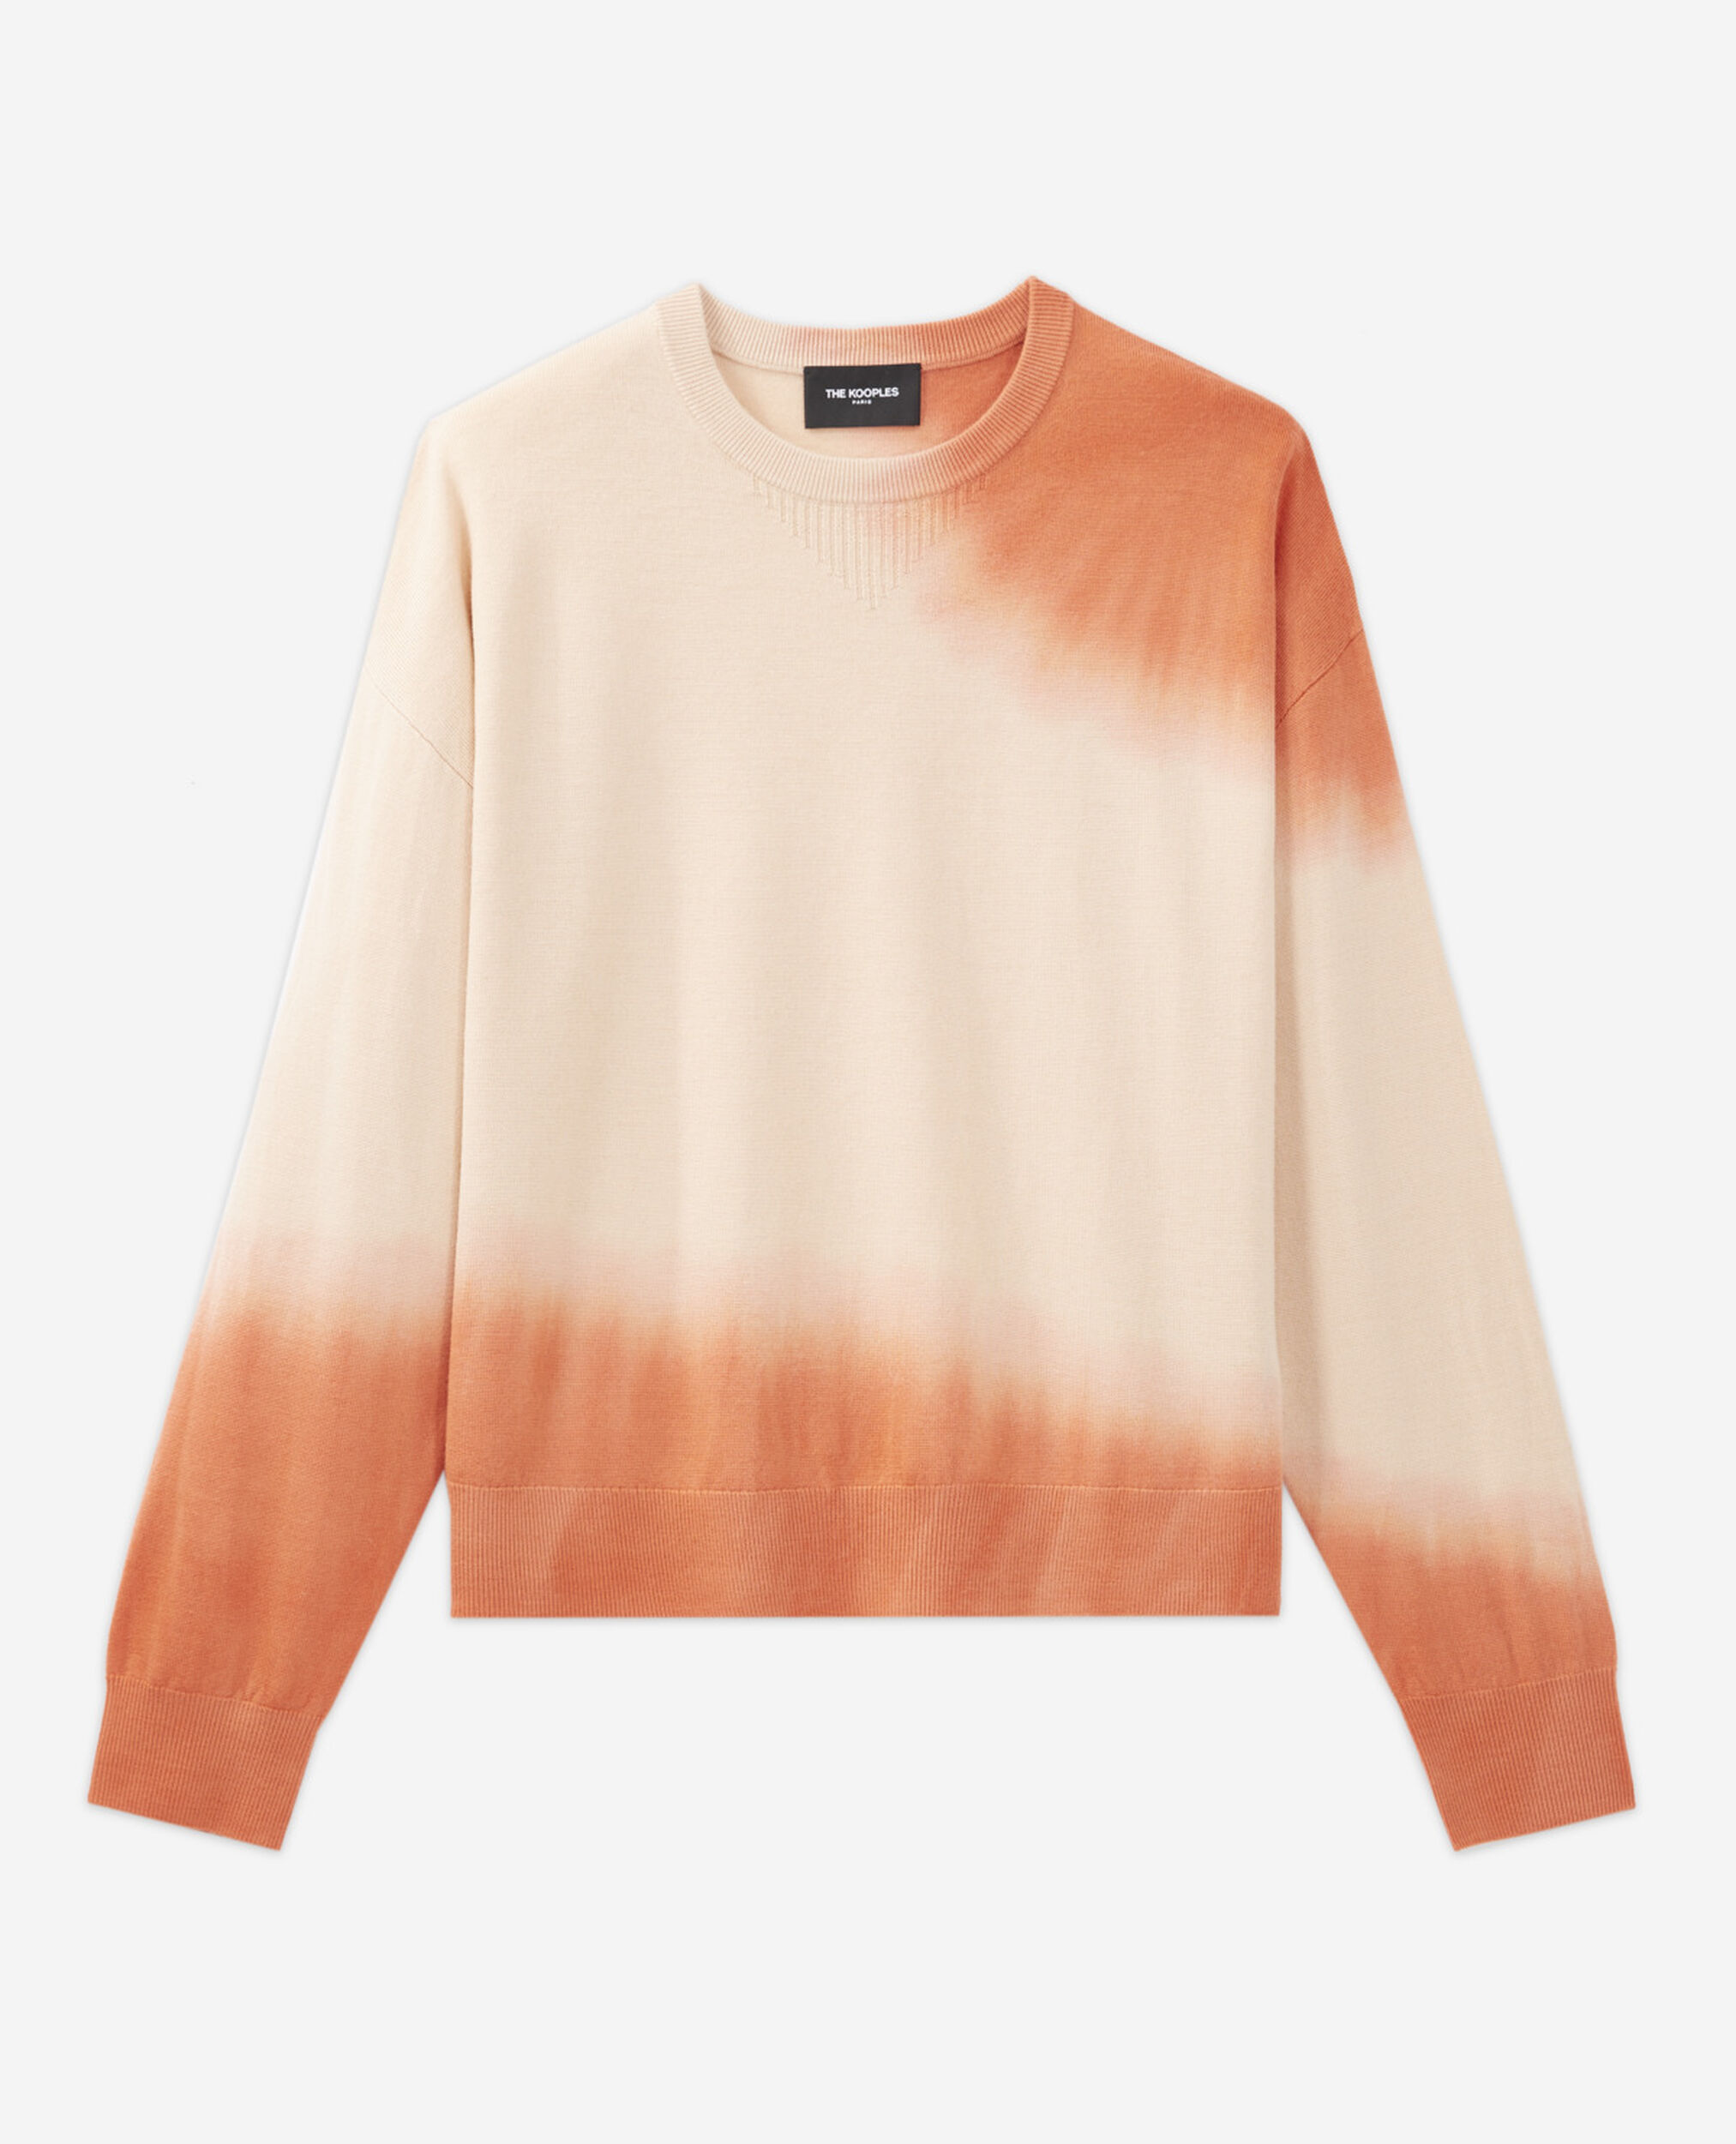 Pull laine pêche ample effet tie - dye, PEACH, hi-res image number null